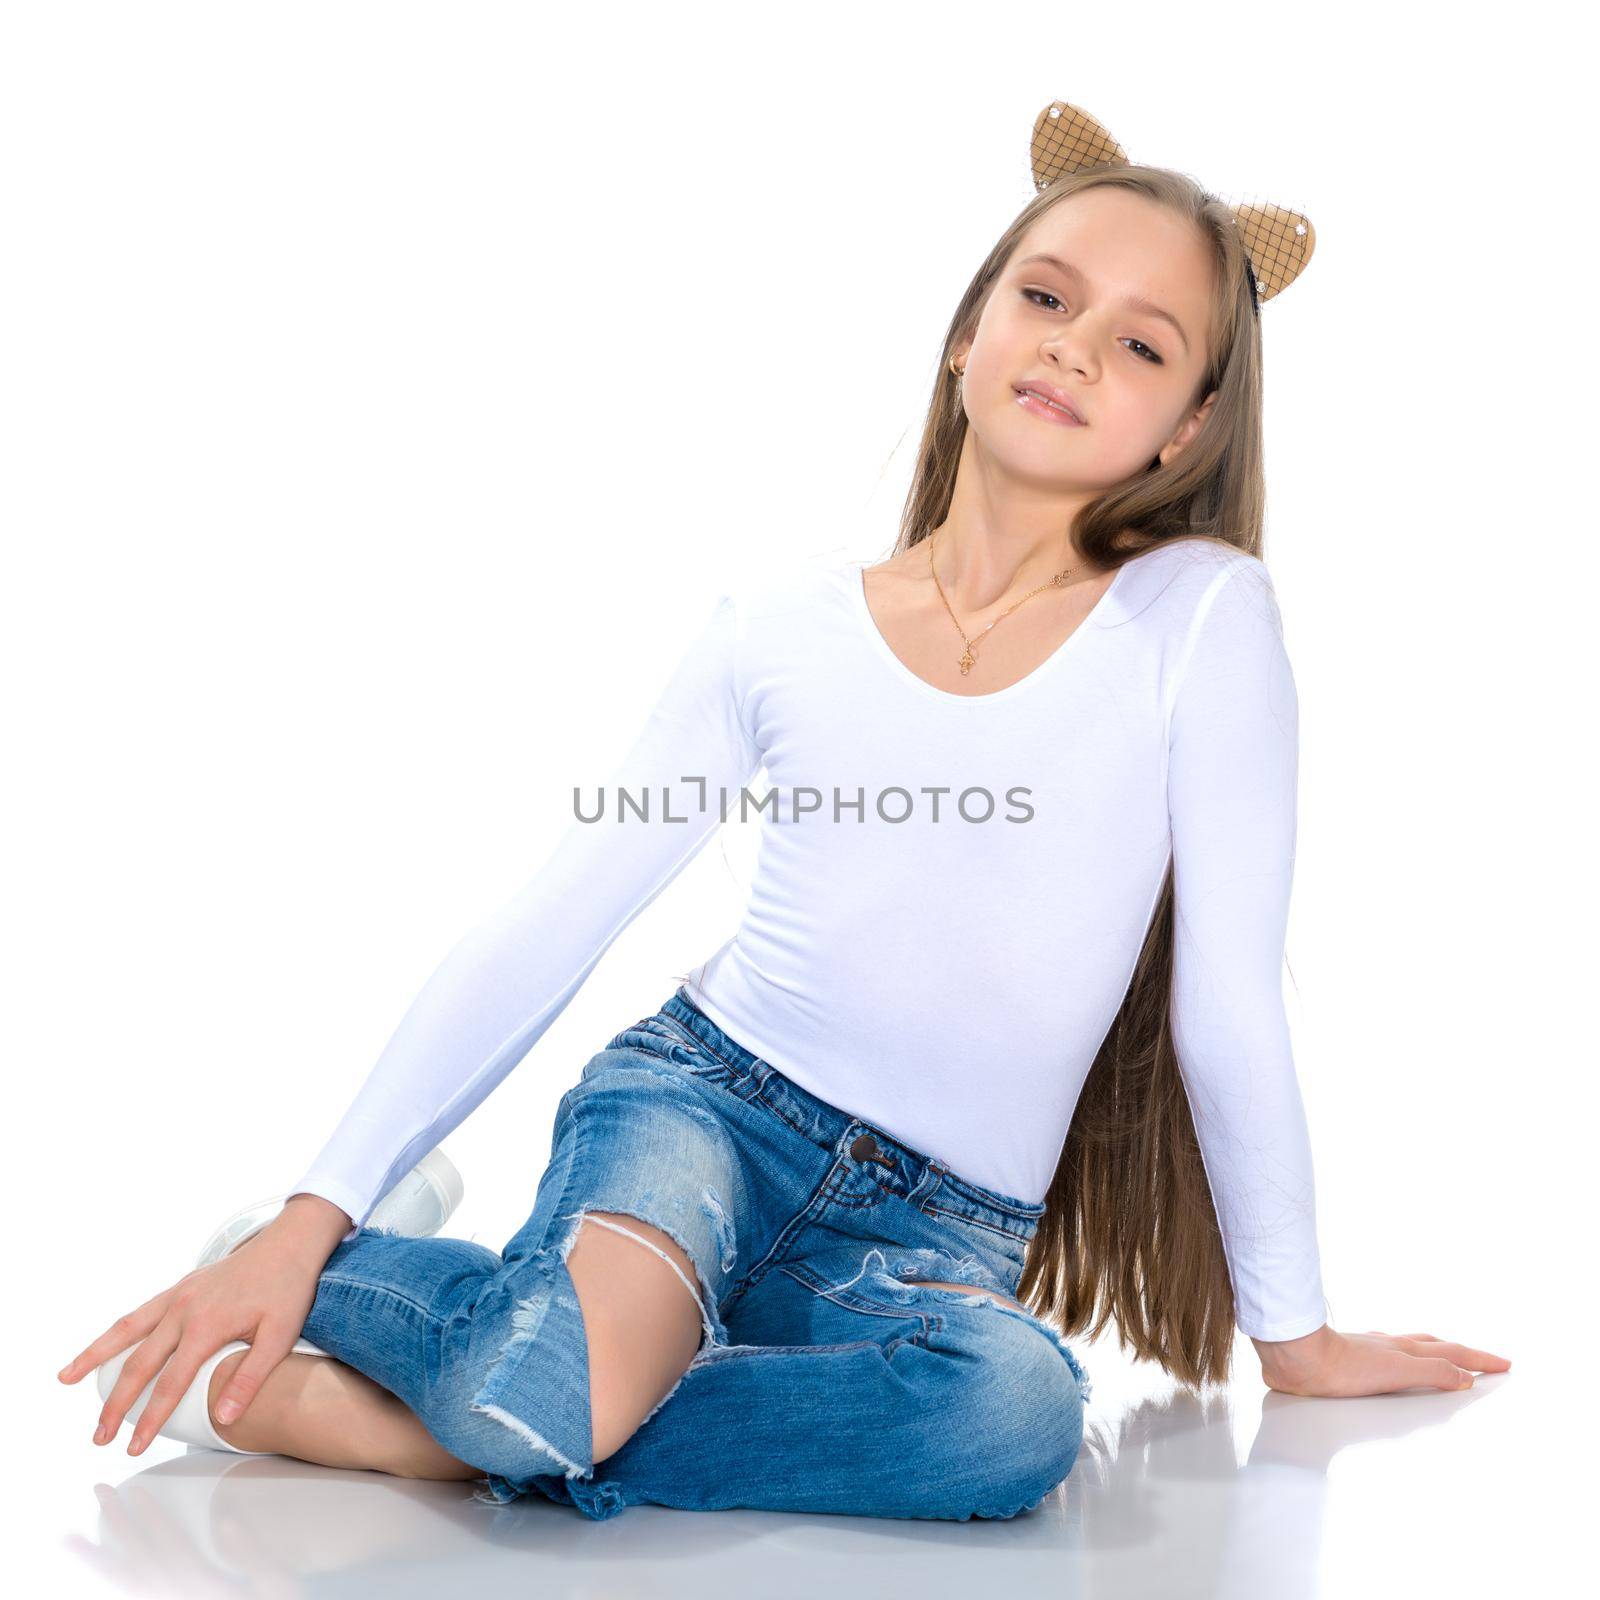 Beautiful teen girl in jeans with holes. by kolesnikov_studio